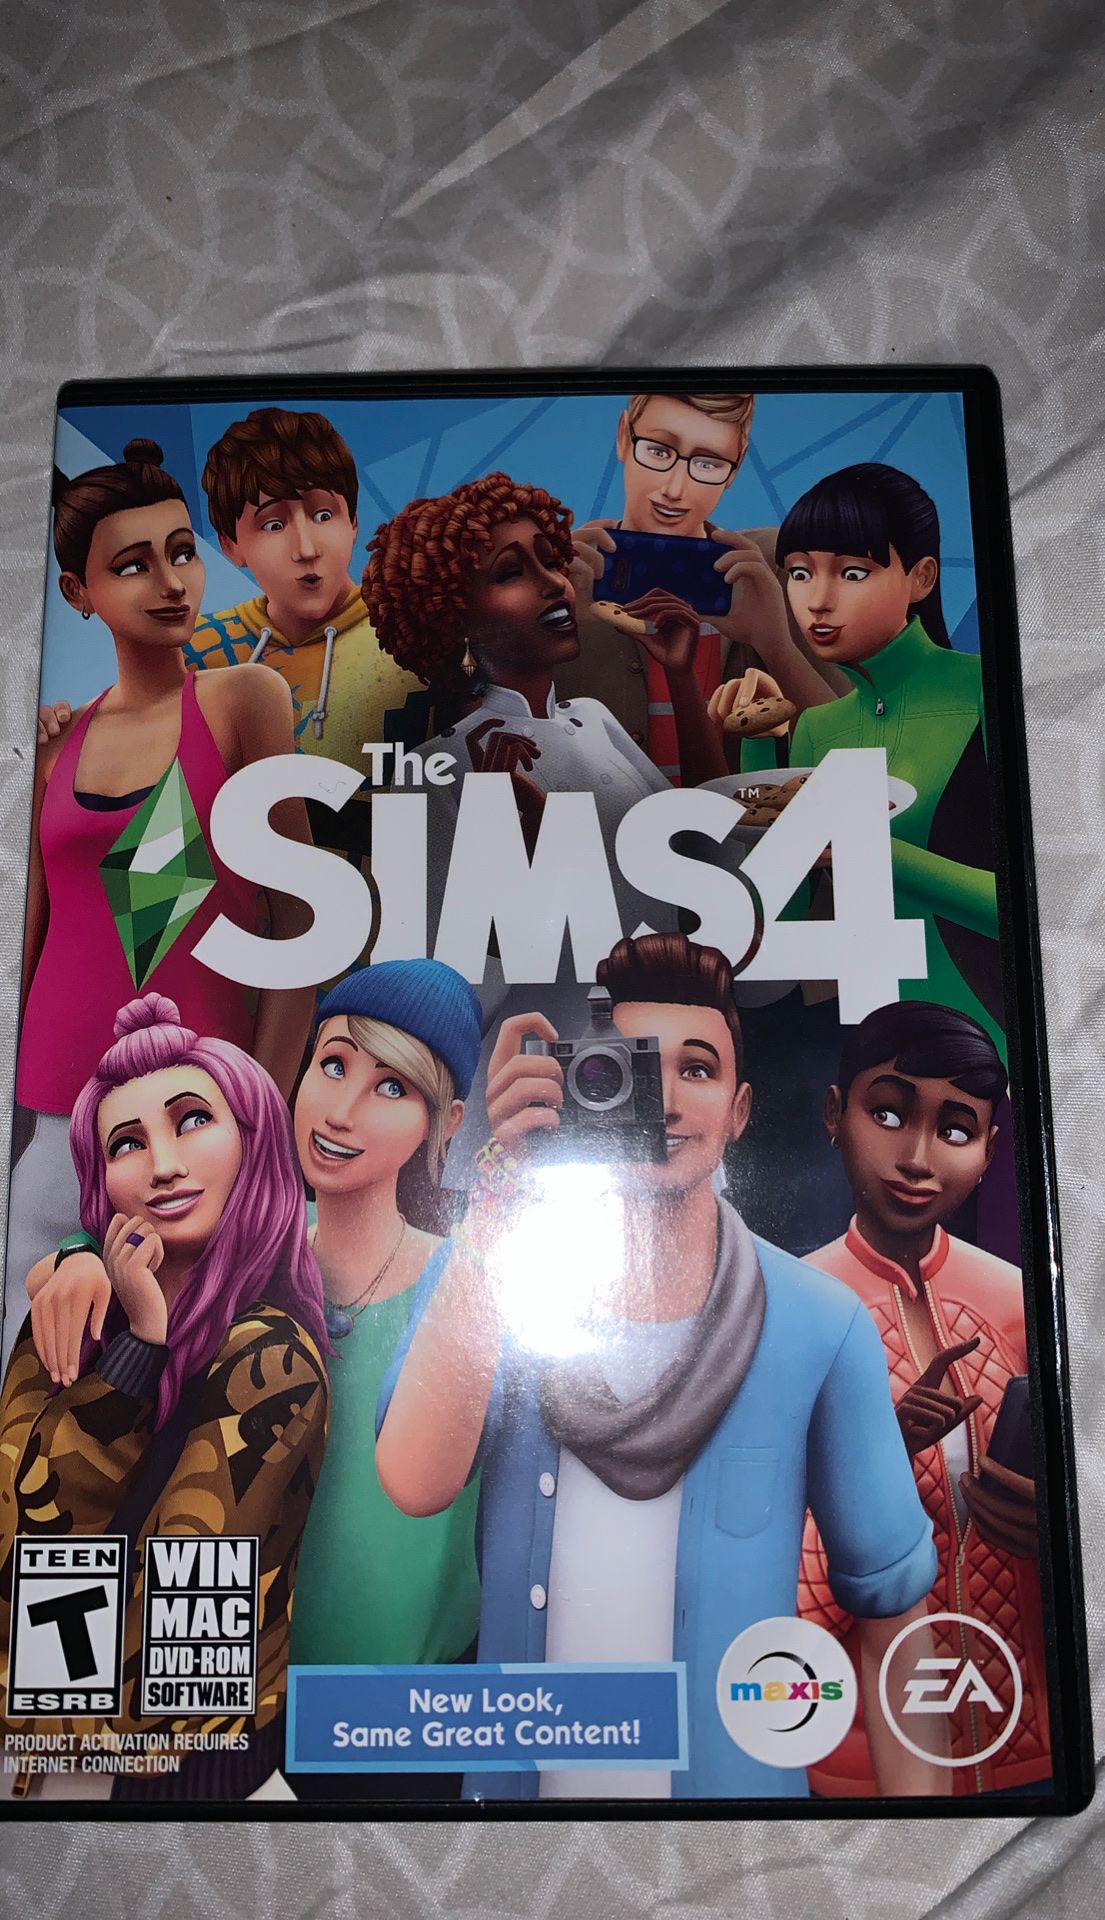 Sims 4 for PC